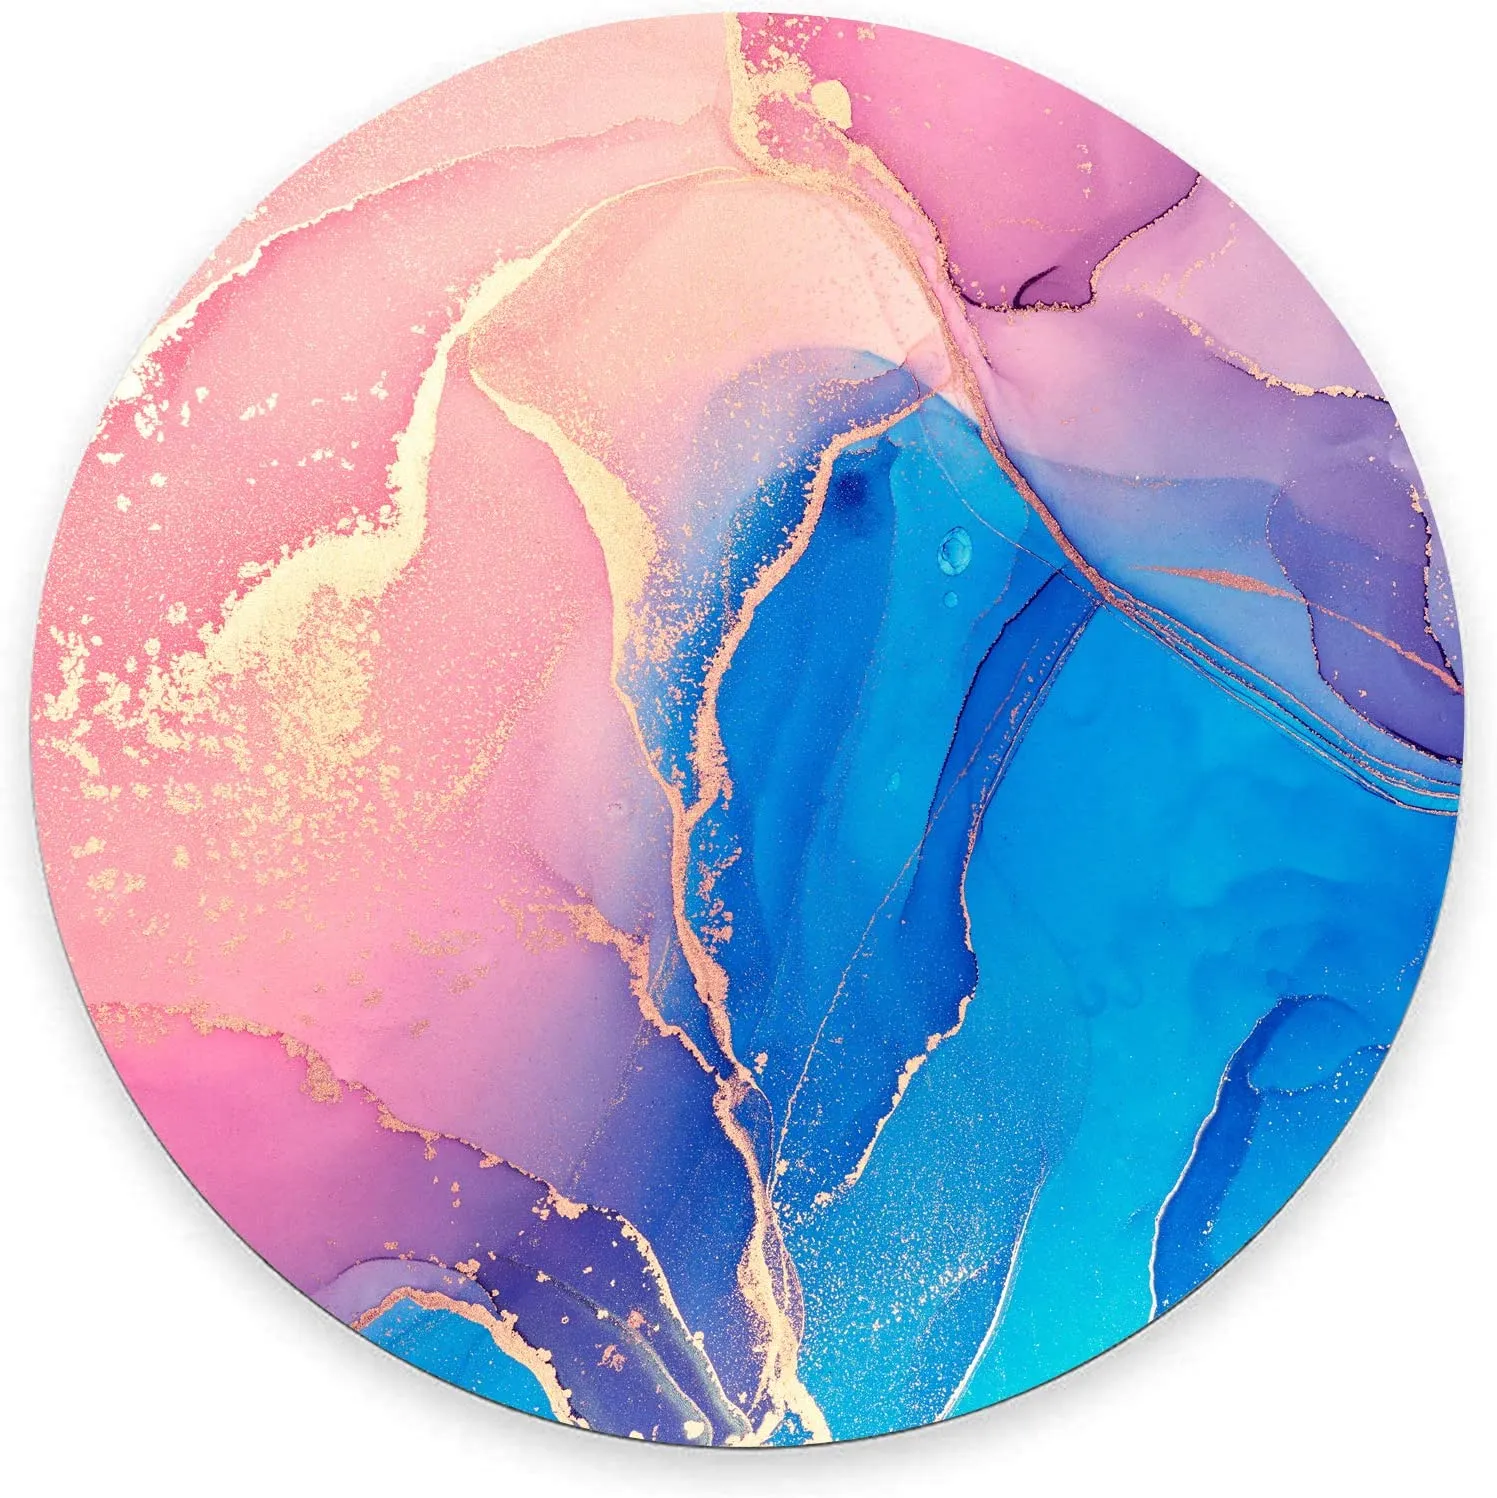 Colorful Marble3 Round Mouse Pad Cute Gaming Mouse Mat Waterproof Non-Slip Rubber Base MousePads 7.9x0.12 Inch